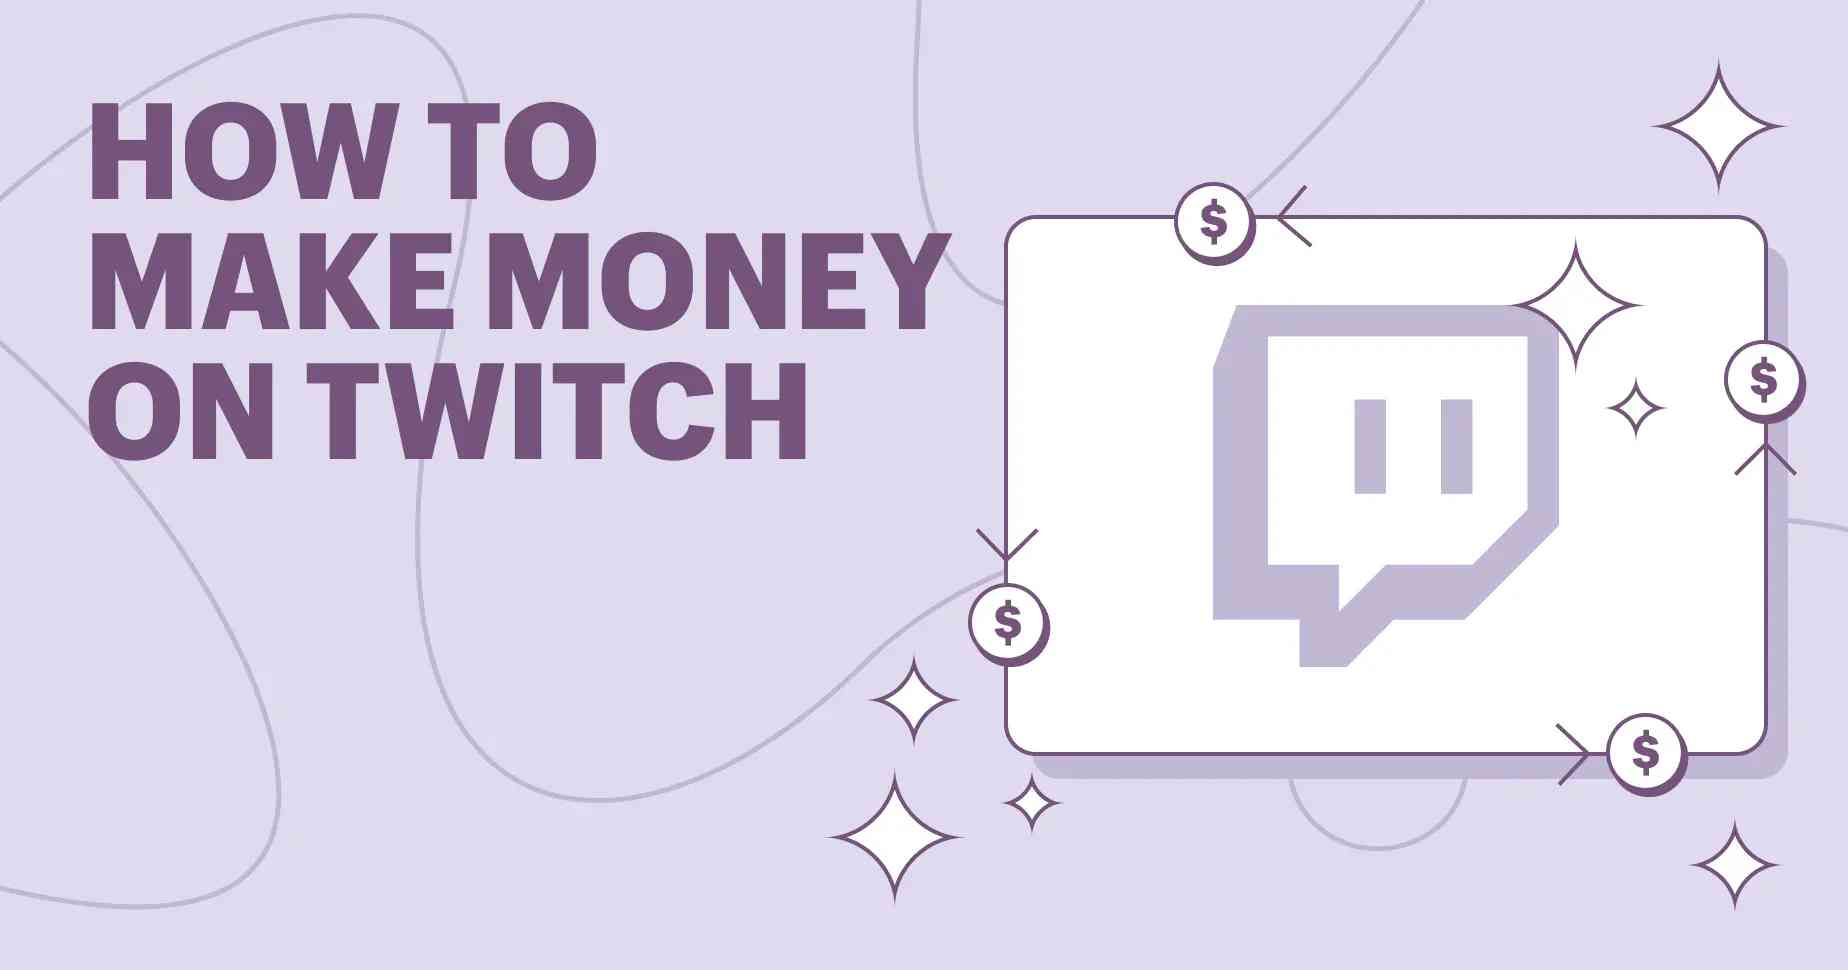 Make money on Twitch: Tips and Strategies